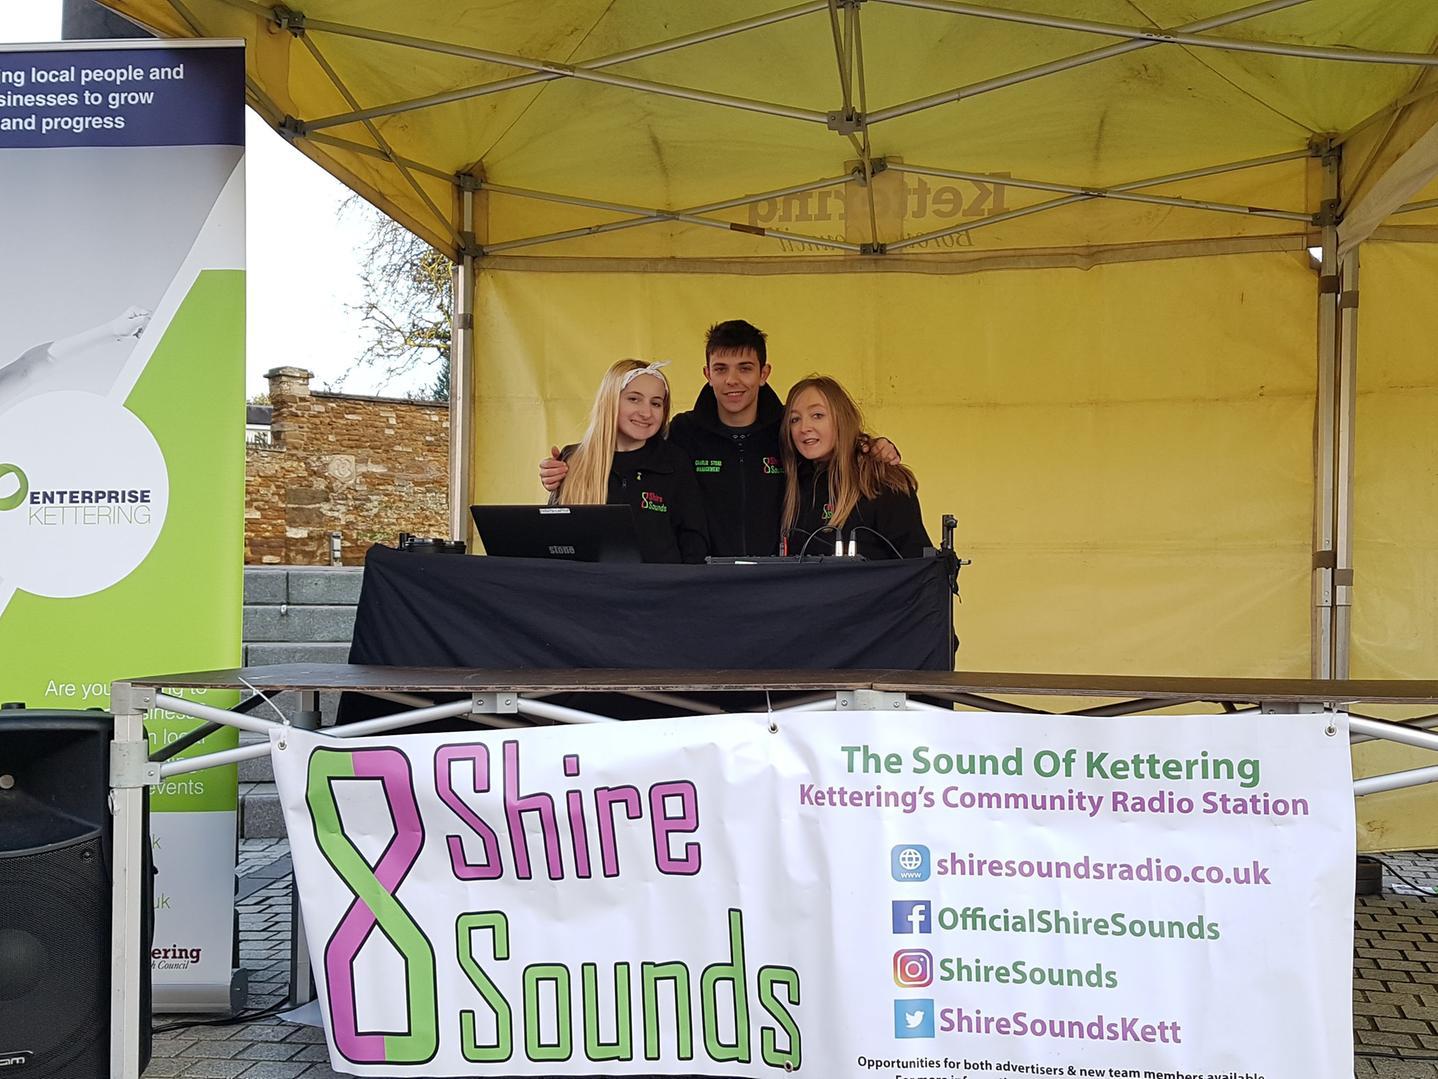 Kettering's local radio Shire Sounds were playing lots of music and broadcasting live from the event. Station manager Charlie Stone (centre) said they aim to put local radio back in the community and they cover a lot of local events and news.